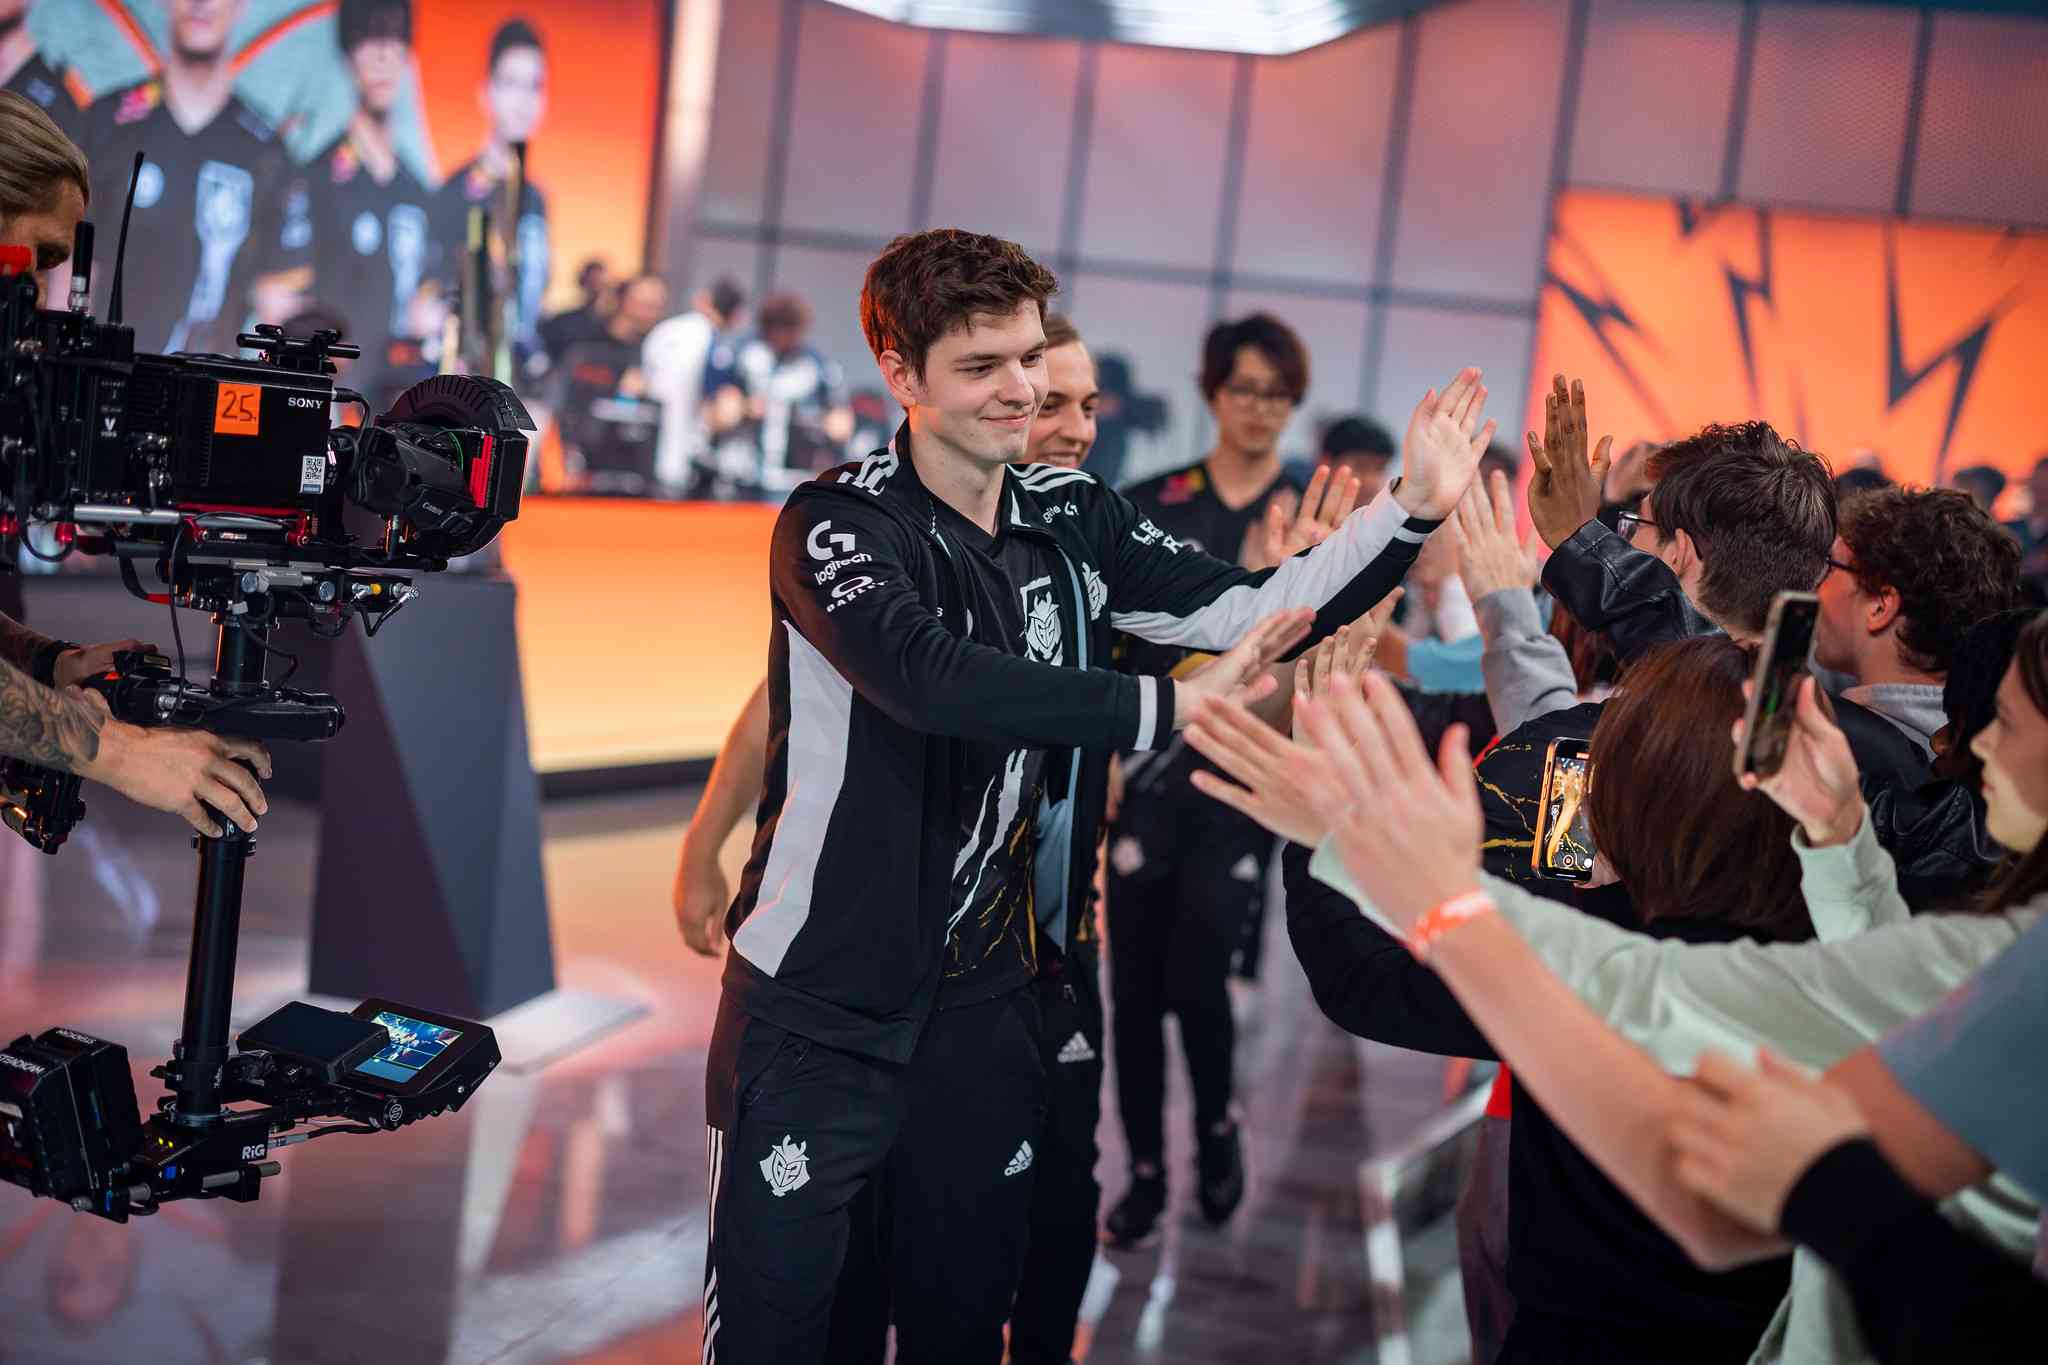 Fans lining up to high five victorious G2 players (Image Credits: Michal Konkol/Riot Games)